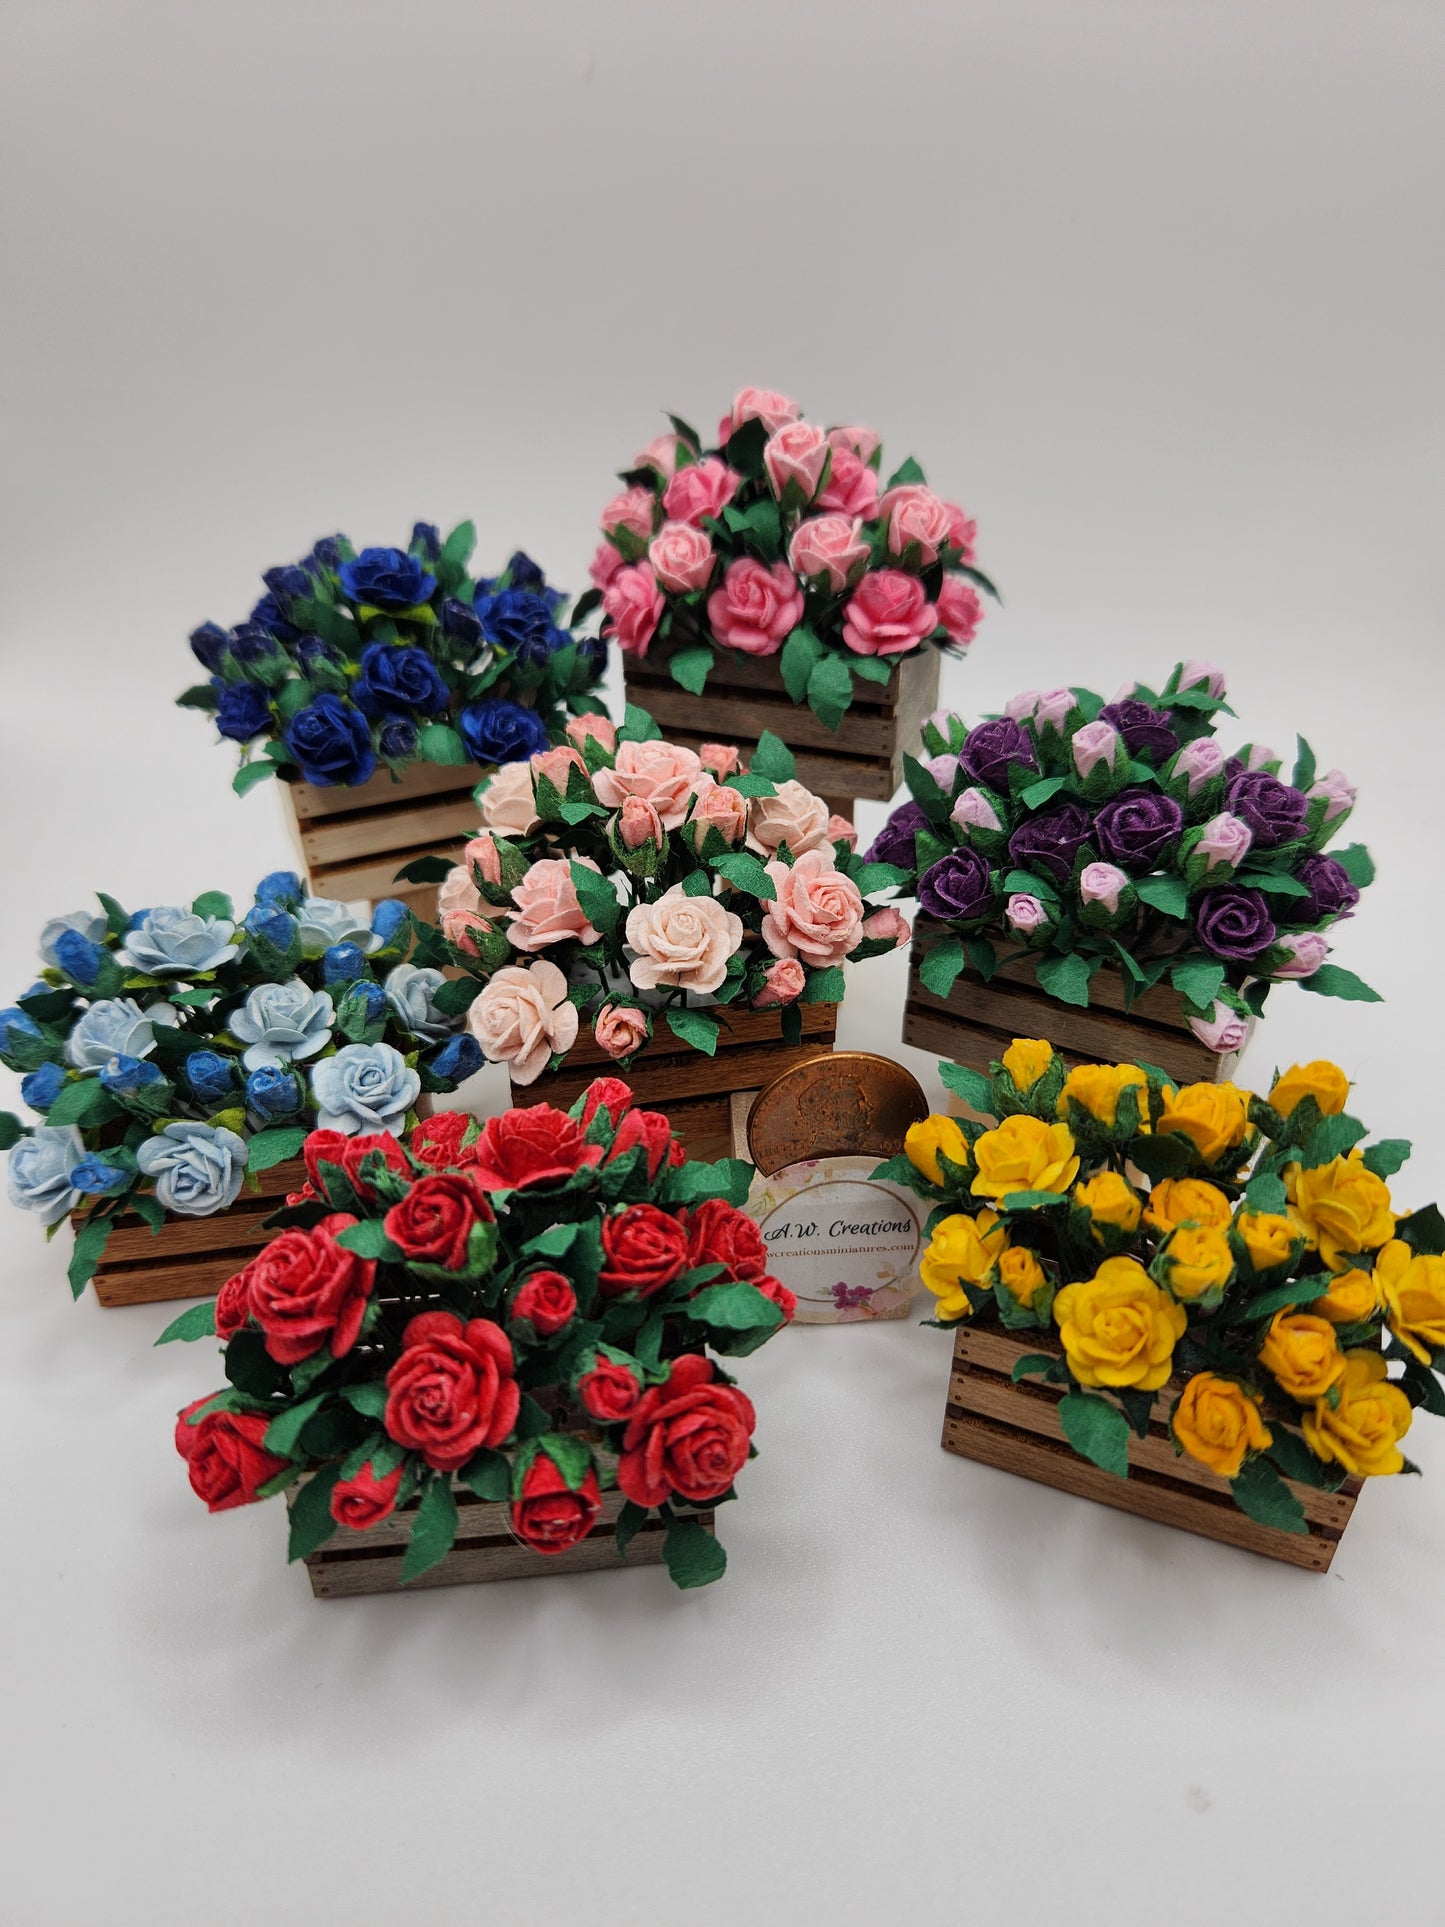 Crate of Roses